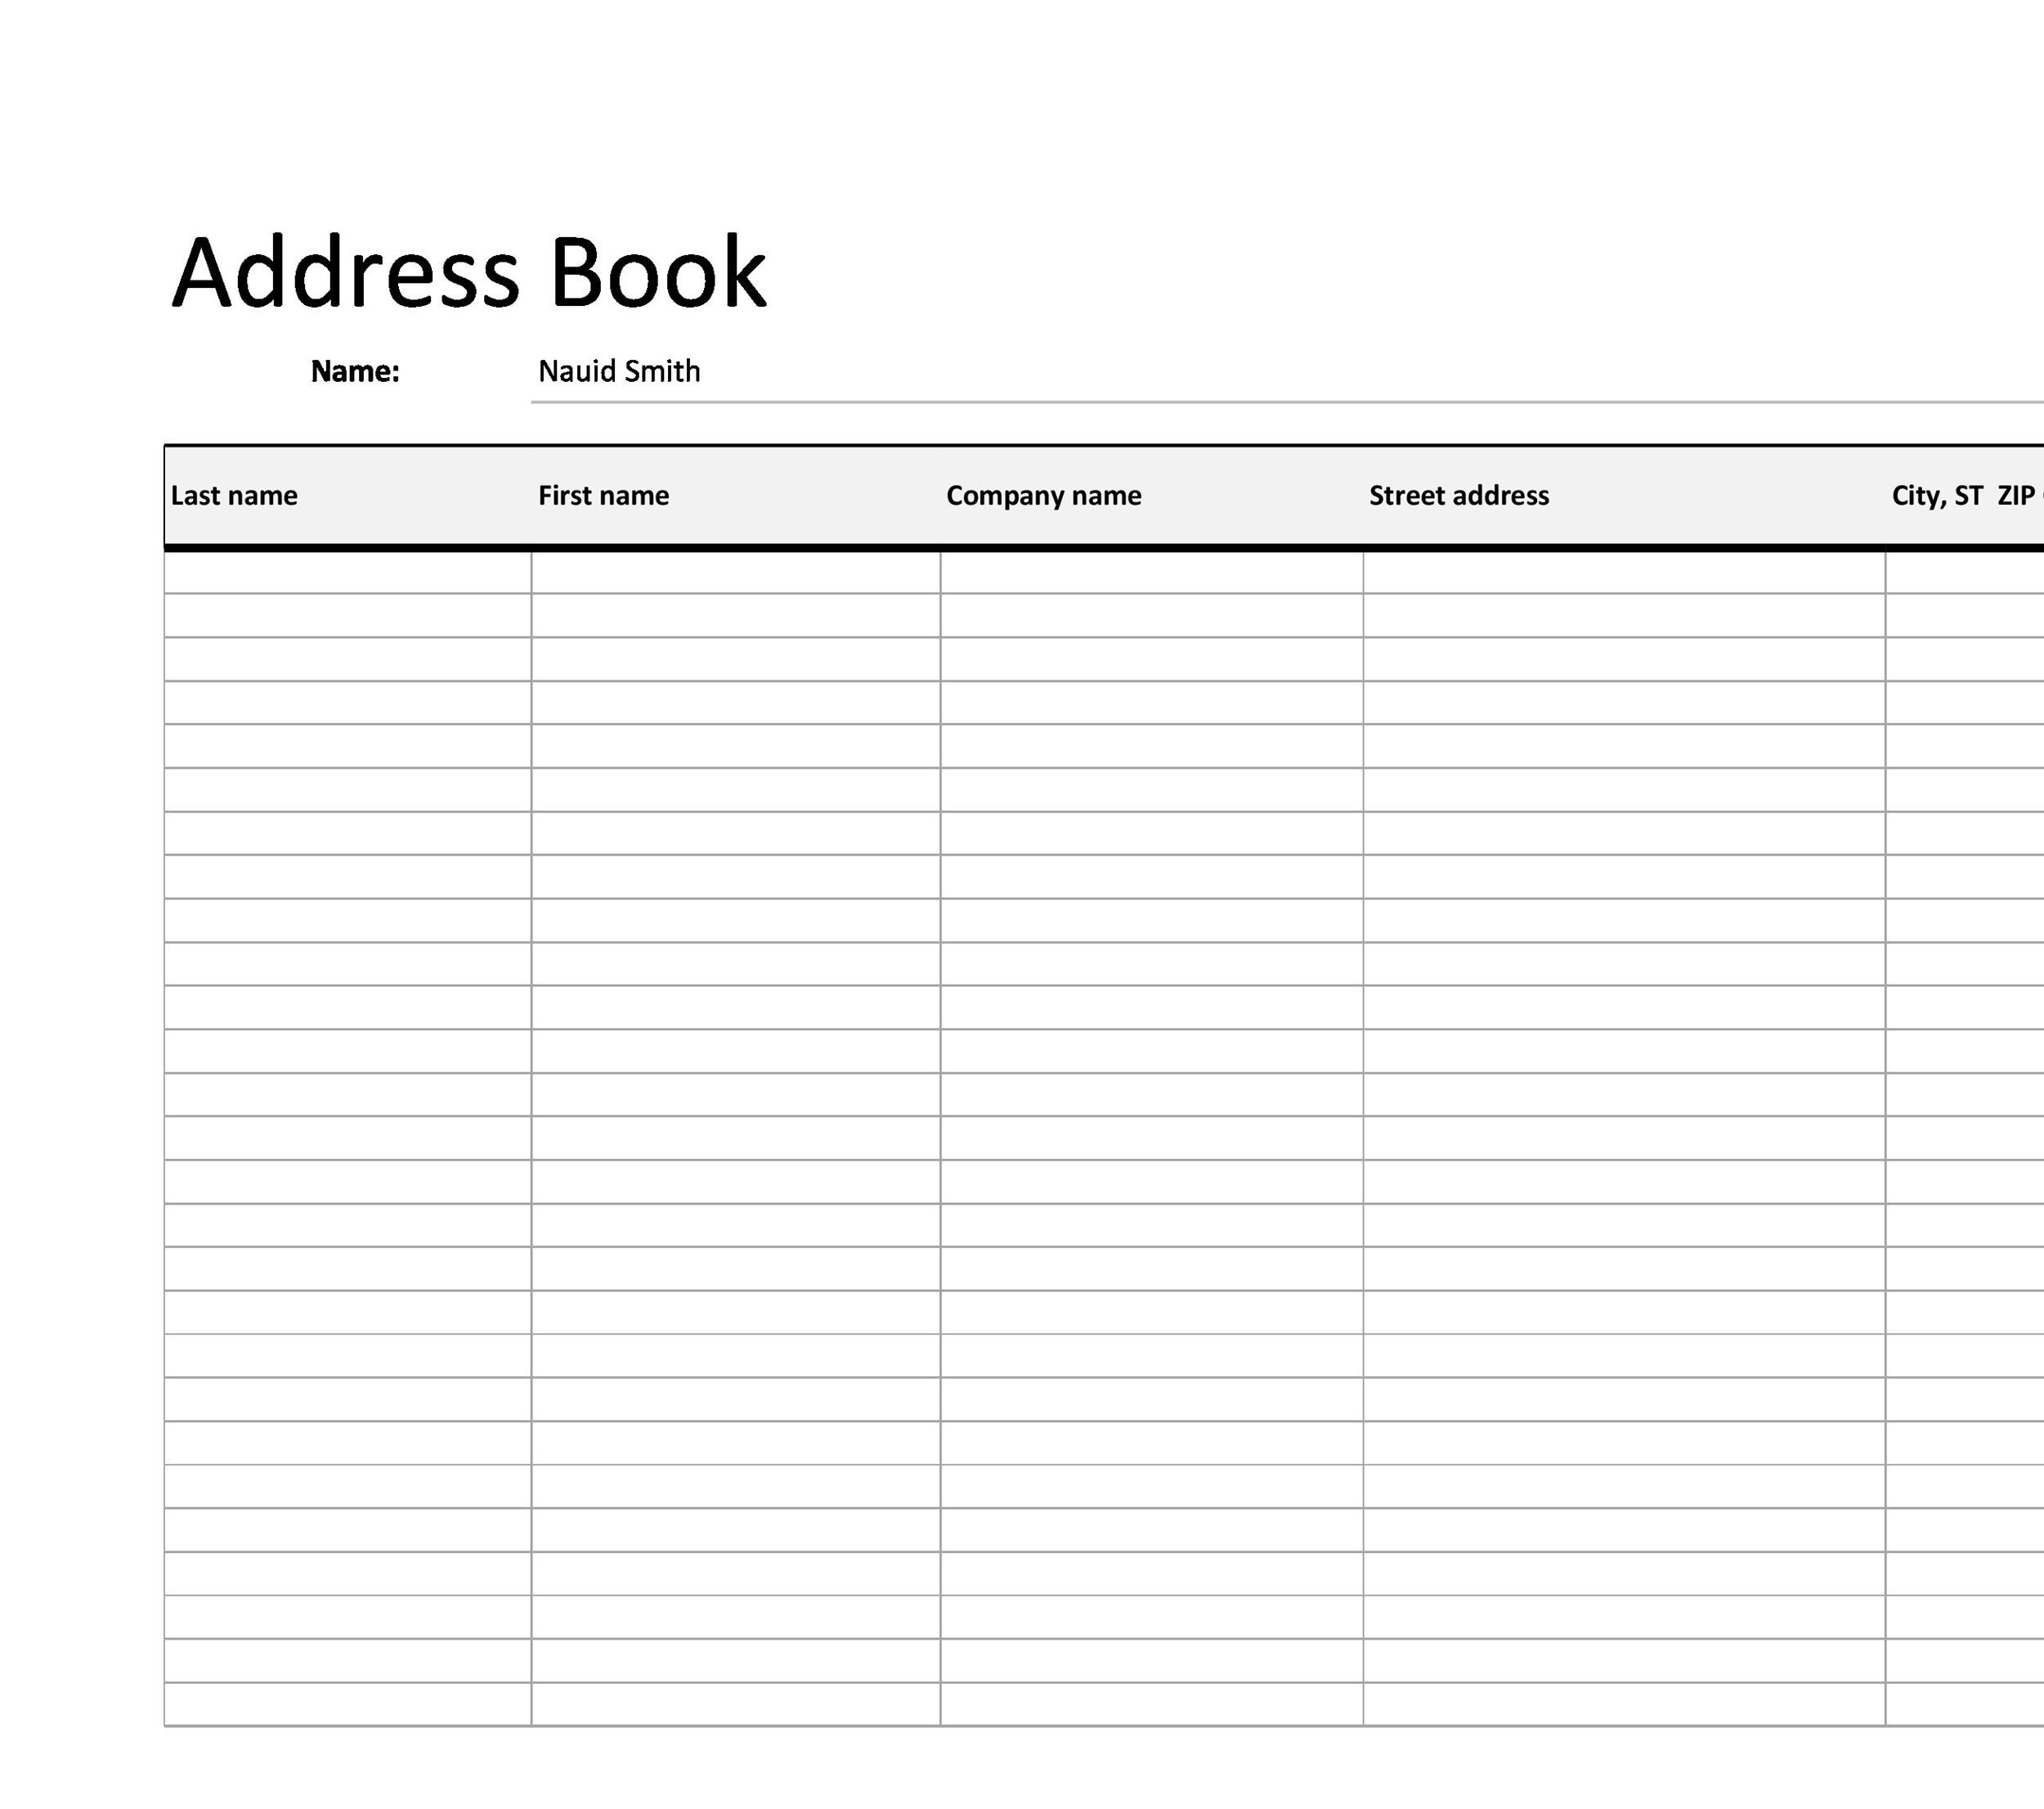 40 Phone & Email Contact List Templates [Word, Excel] ᐅ TemplateLab